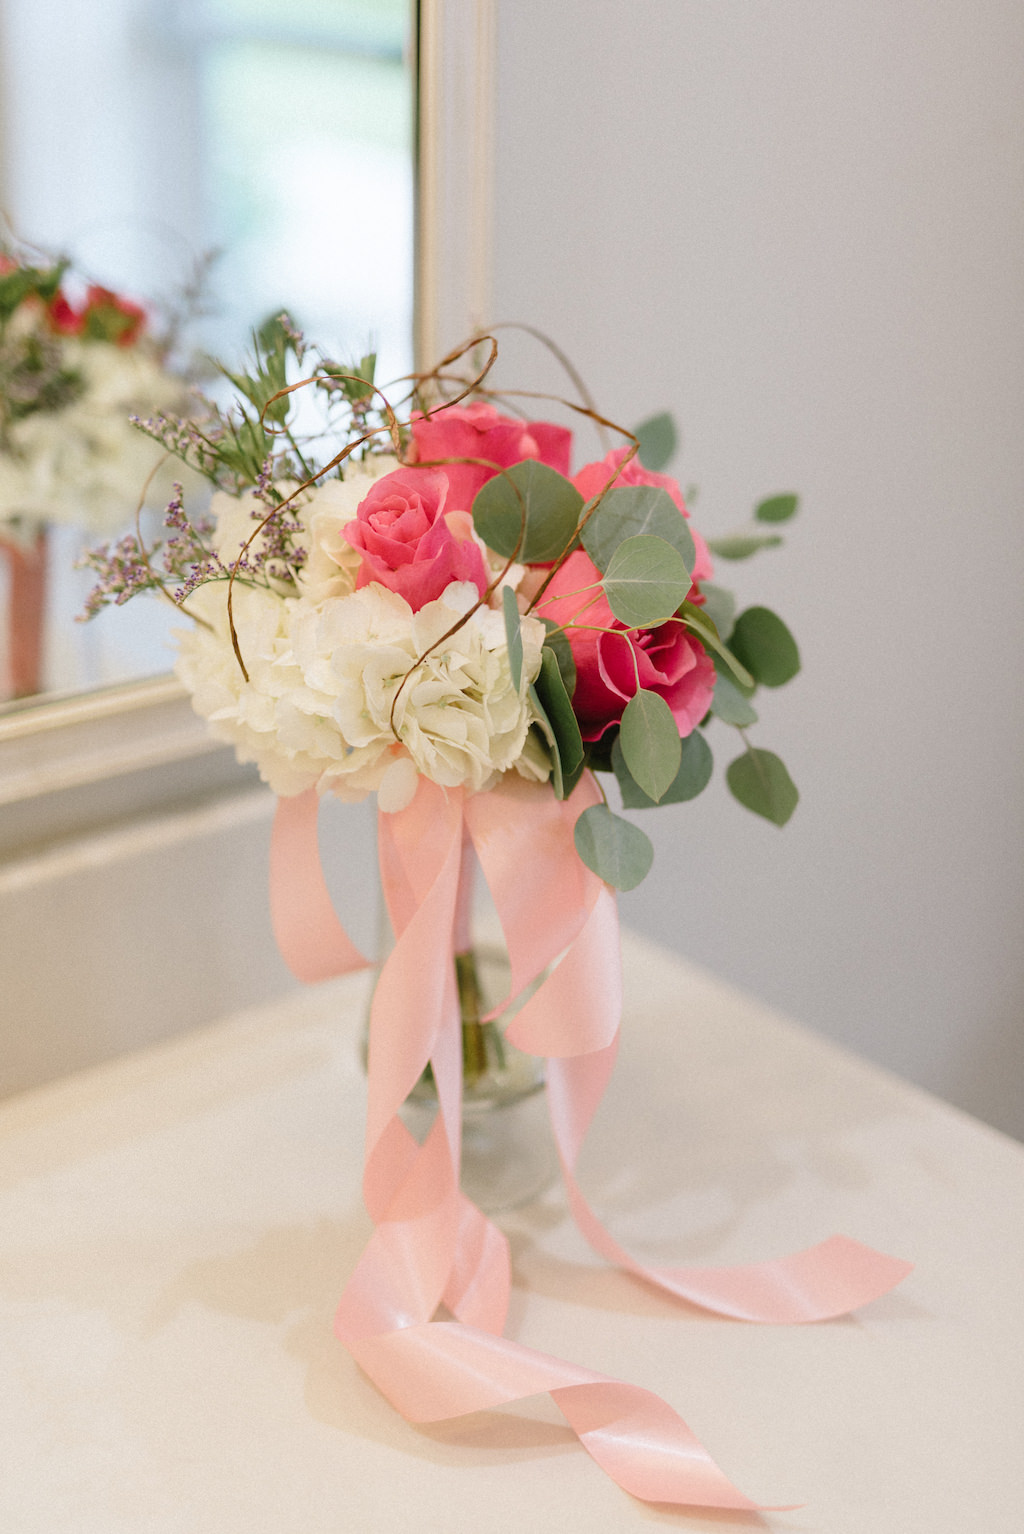 Simple Wedding Ceremony Decor, White Hydrangea, Pink Roses and Greenery Floral Bouquet with Blush Pink Ribbon in Glass Vase | St Pete Florist Apple Blossoms Floral Designs | Tampa Wedding Photographer Kera Photography